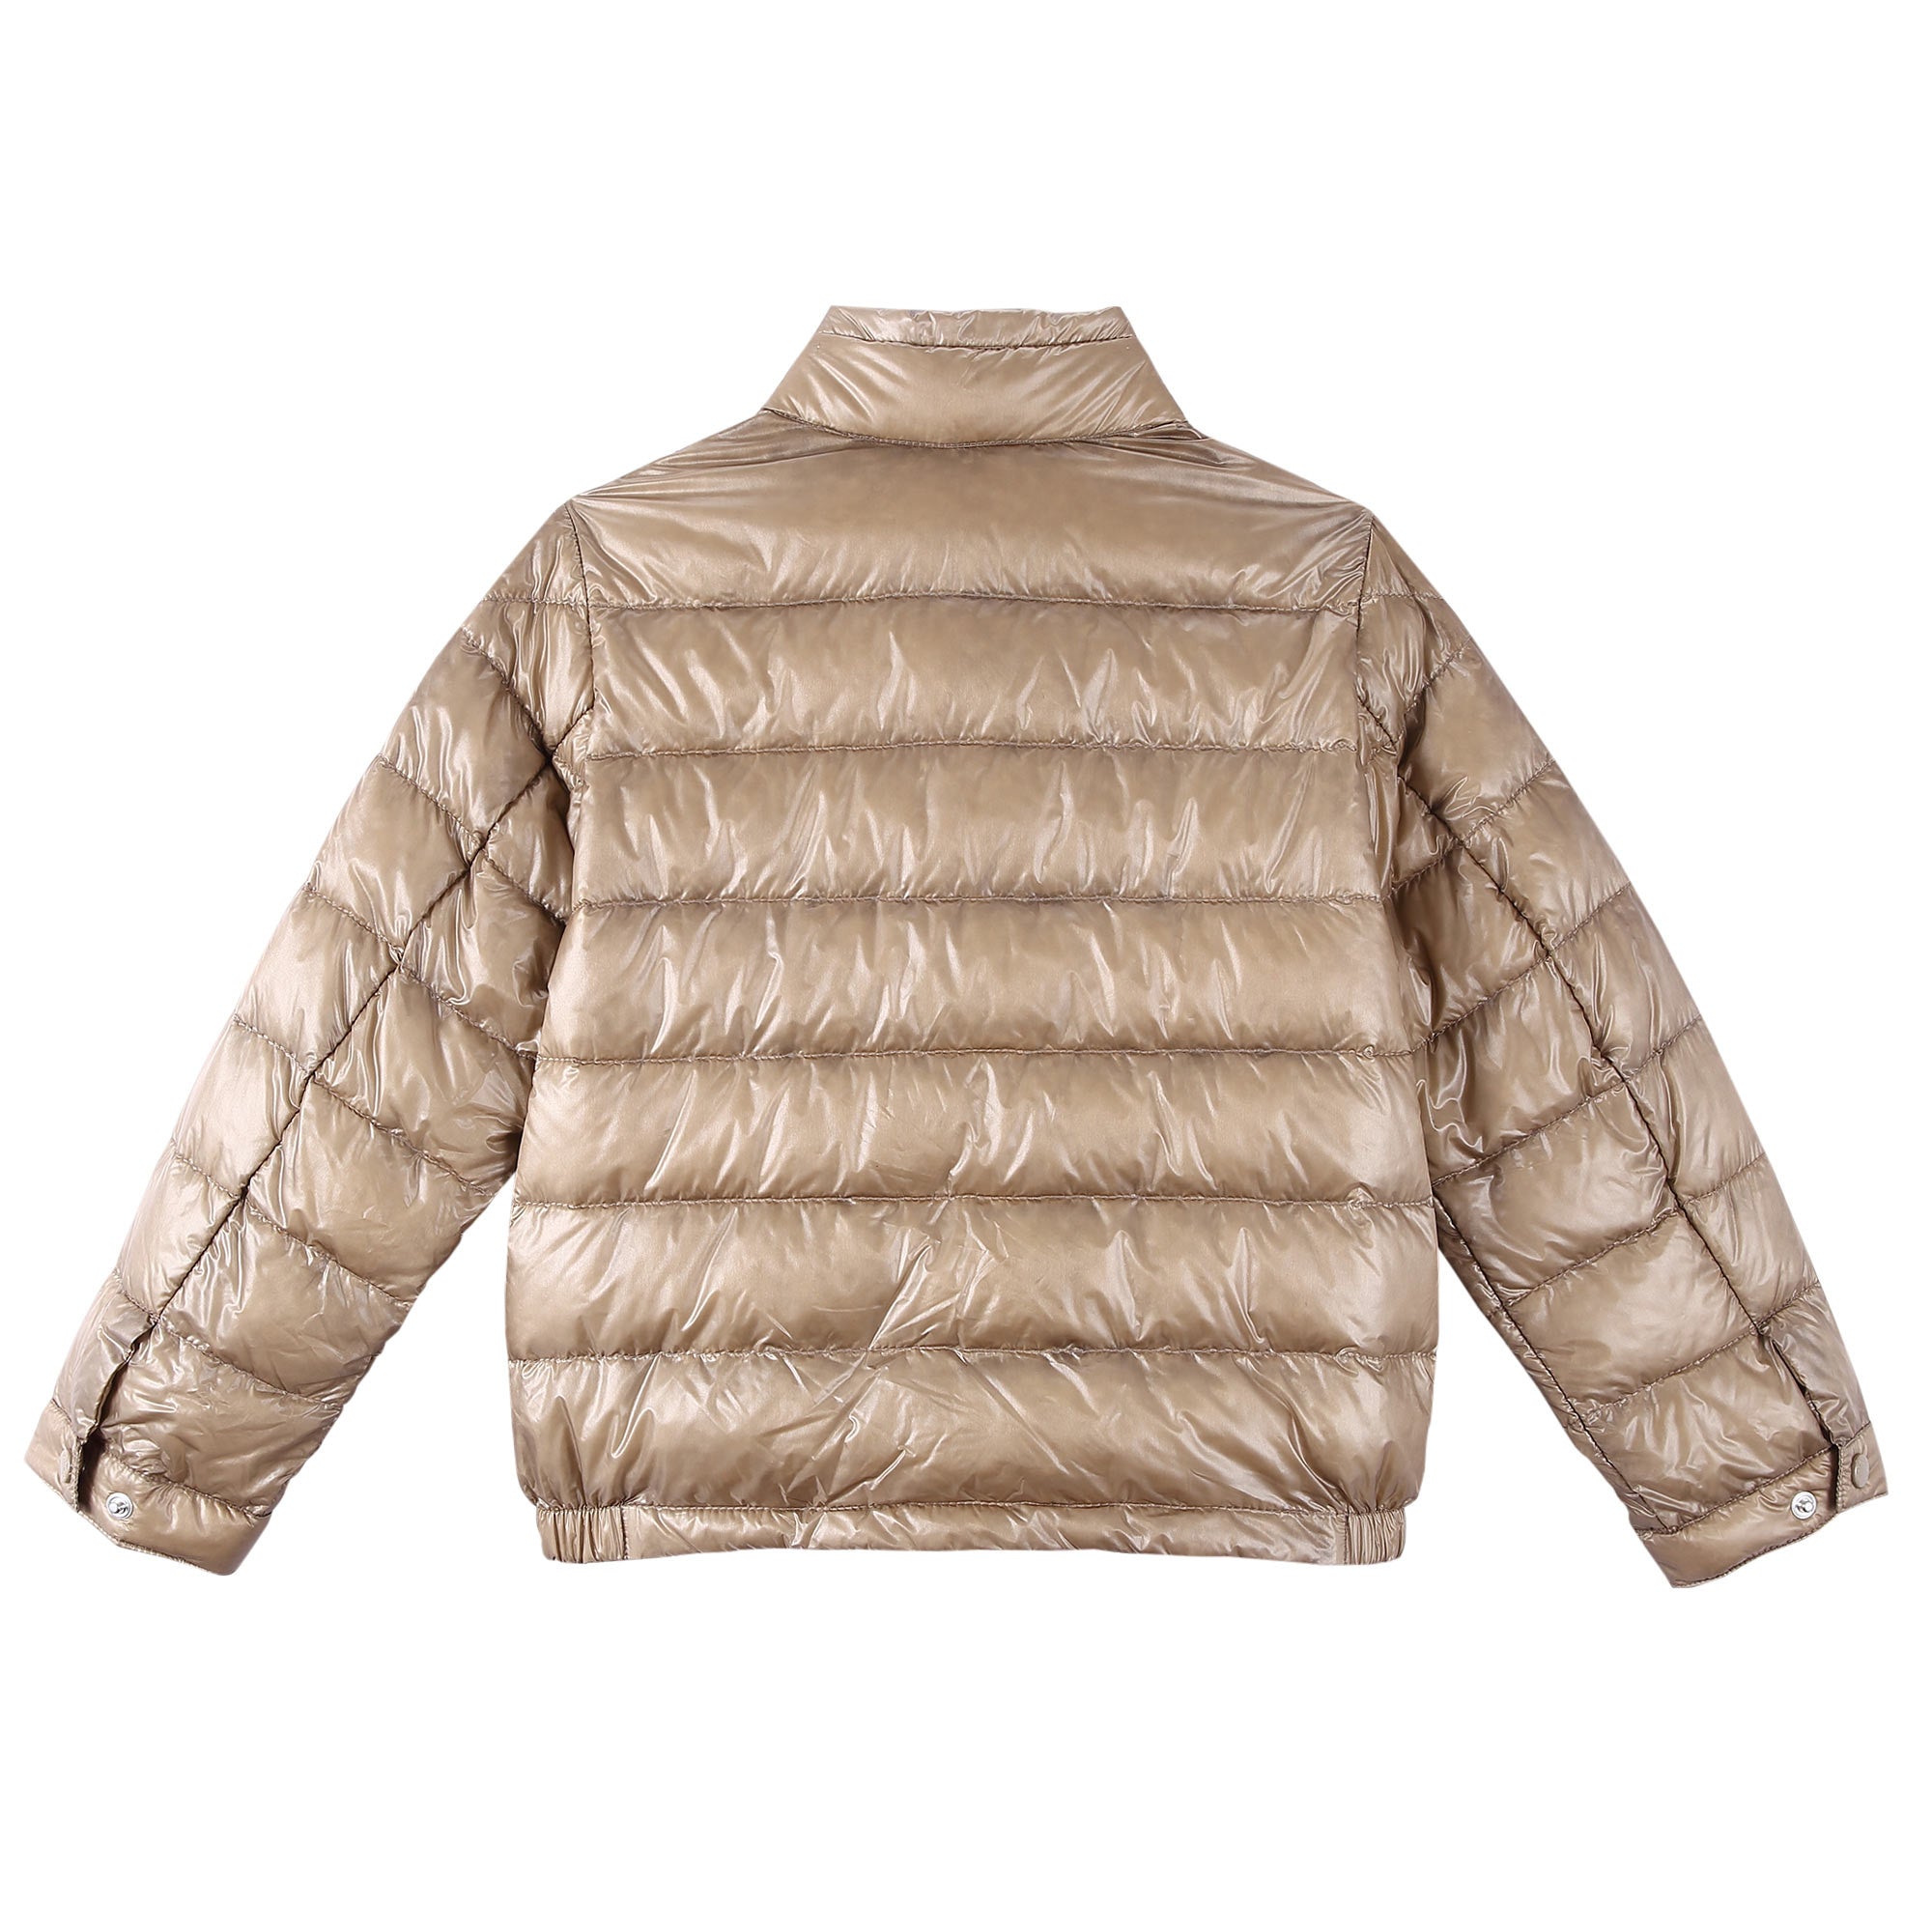 Boys Champagne Down Padded 'Acrous' Jacket With Hidden Pocket - CÉMAROSE | Children's Fashion Store - 2